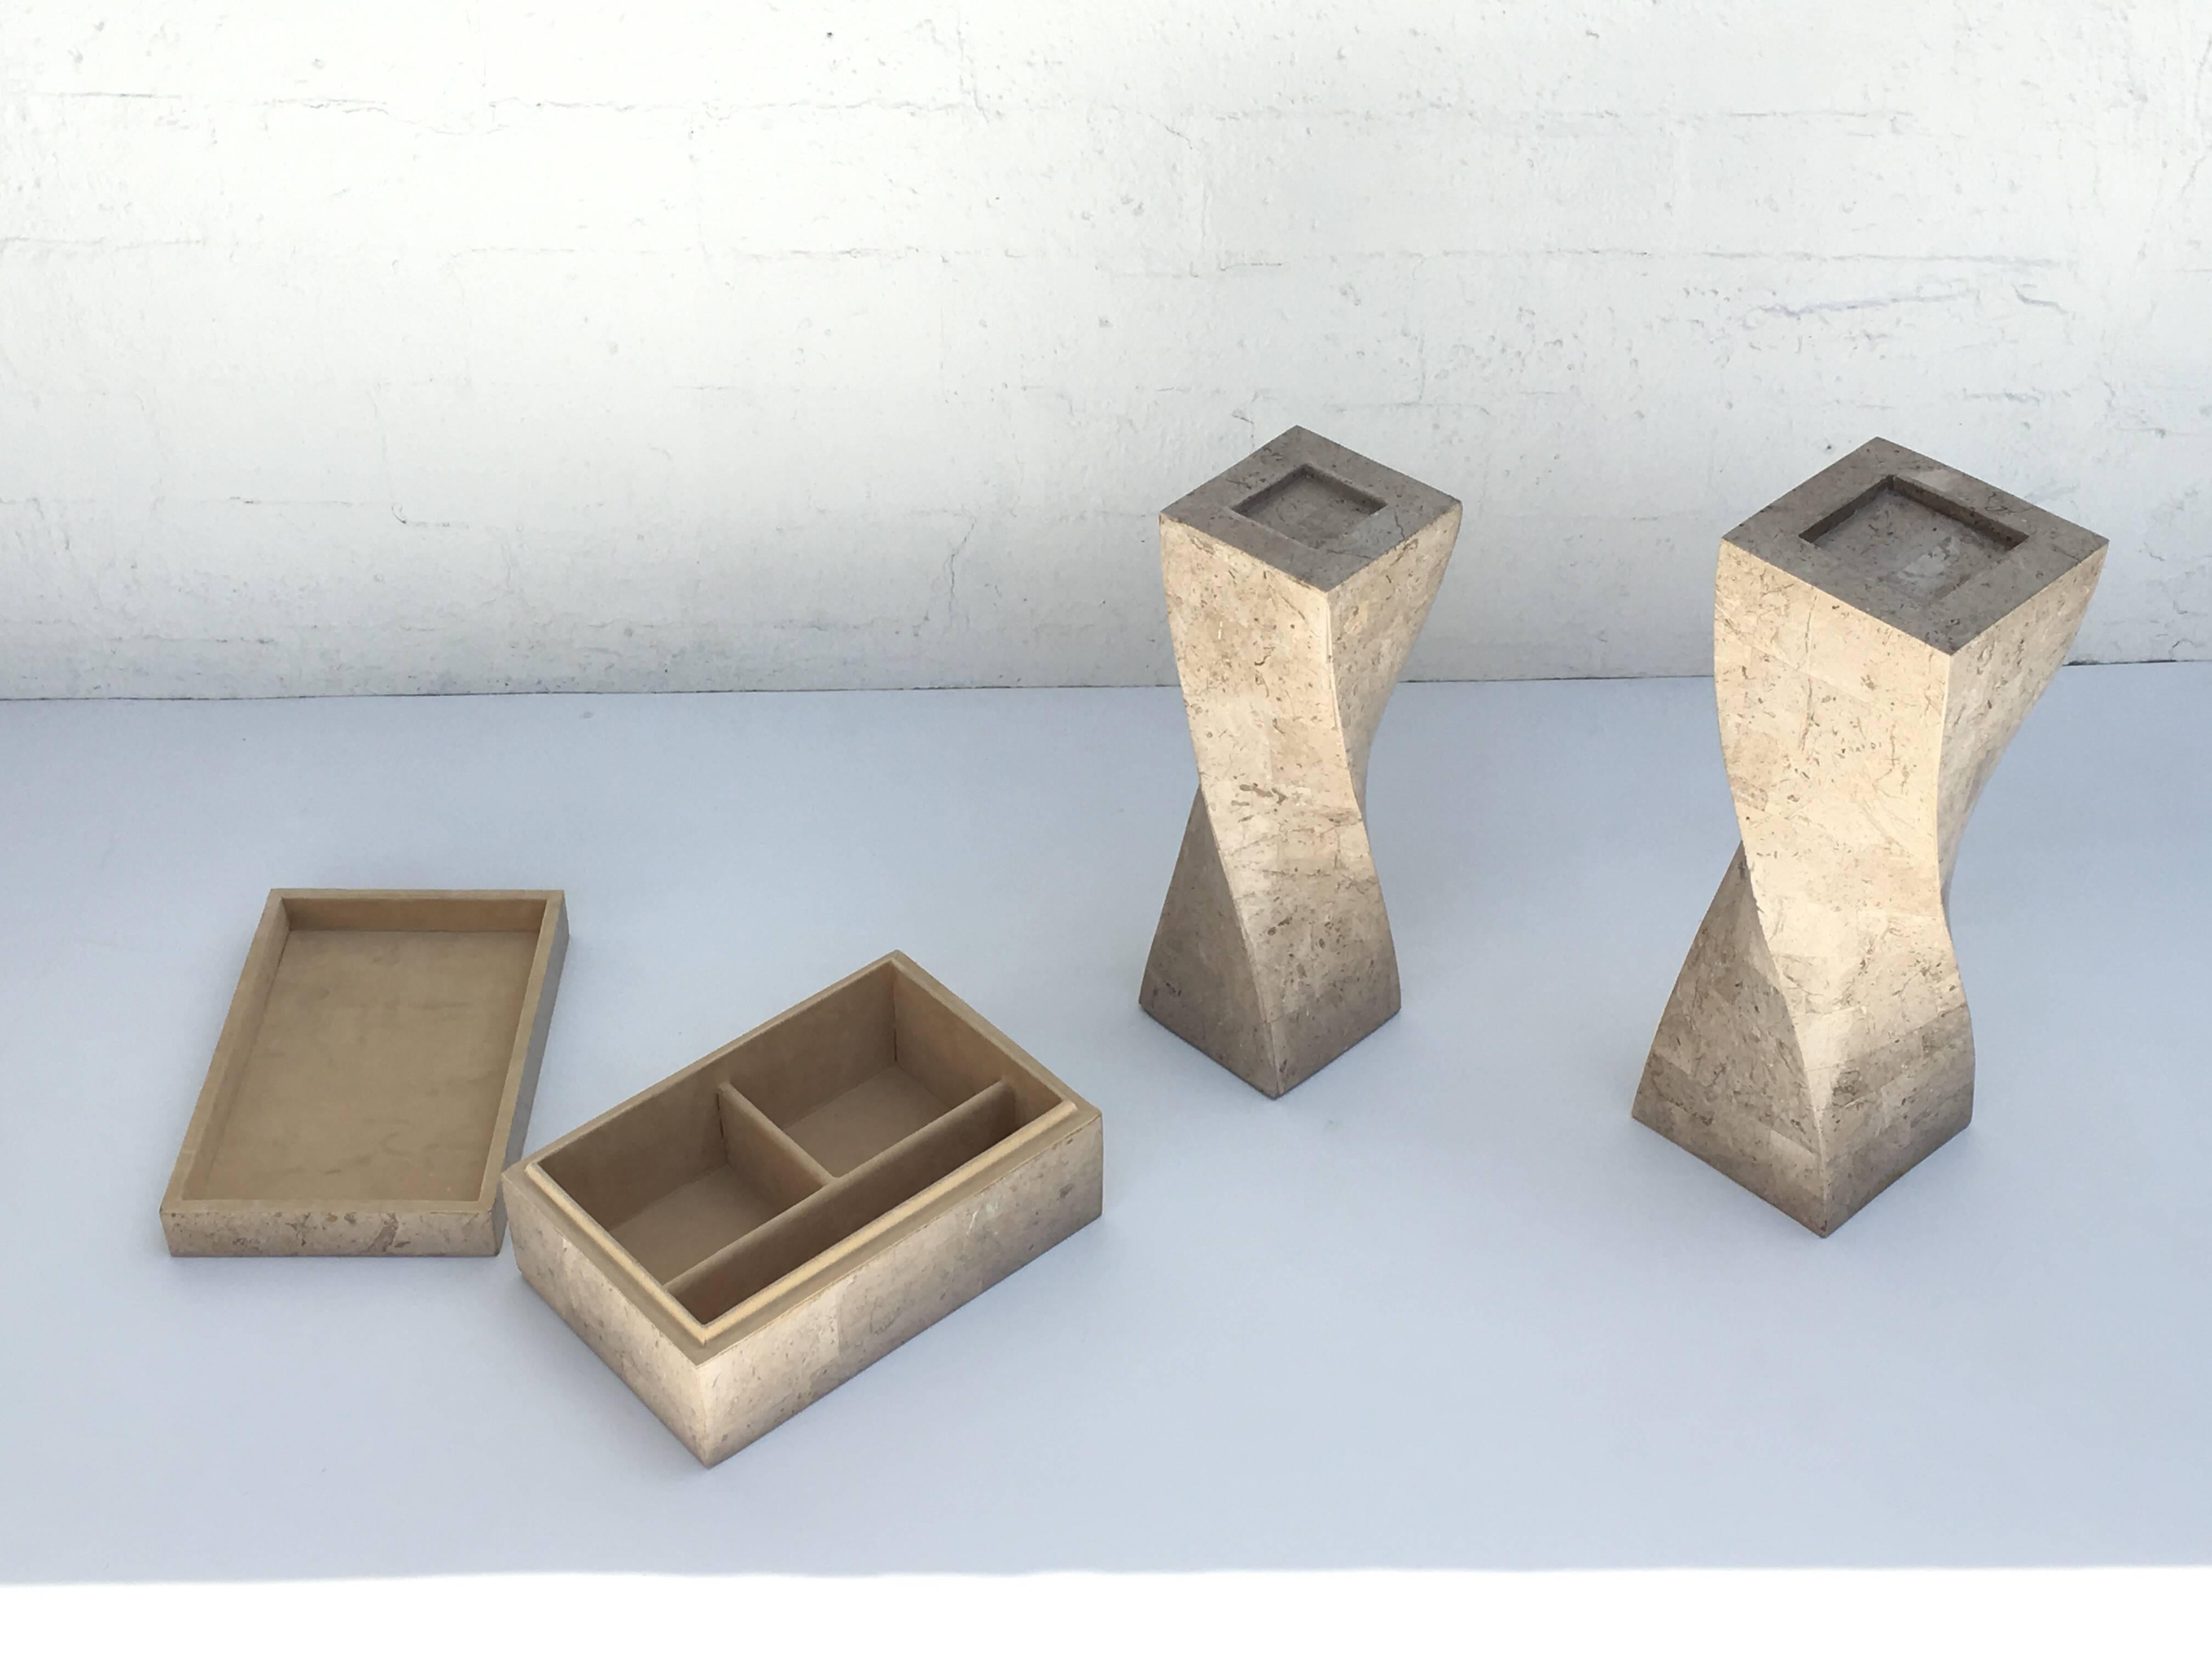 American Polished Travertine Box and Candlesticks by Maitland-Smith